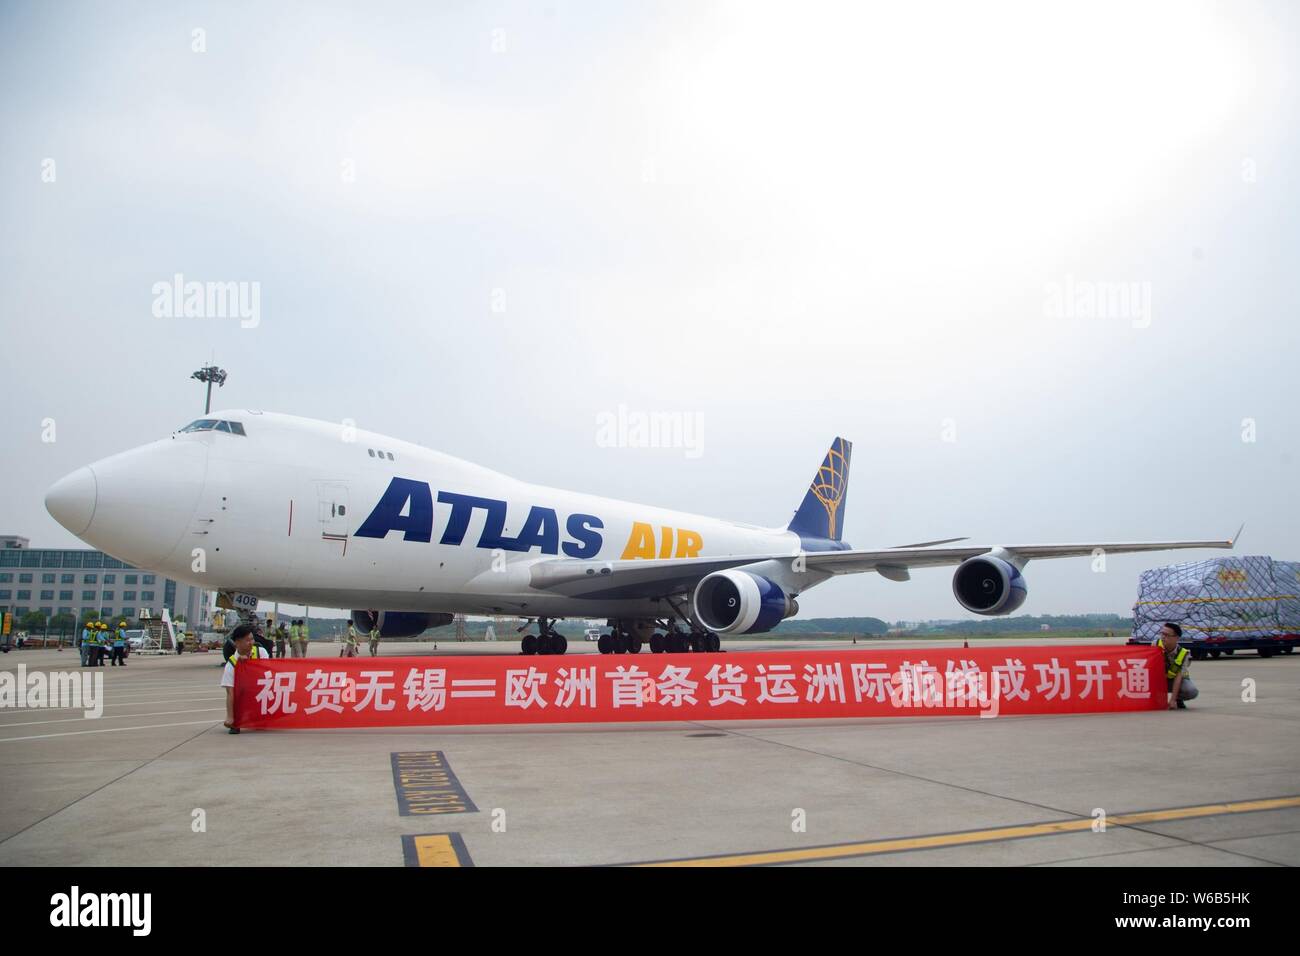 A Boeing 747-400 Freighter jet plane of Atlas Air is pictured at the Sunan Shuofang International Airport before it heads for Germany's Frankfurt-Hahn Stock Photo